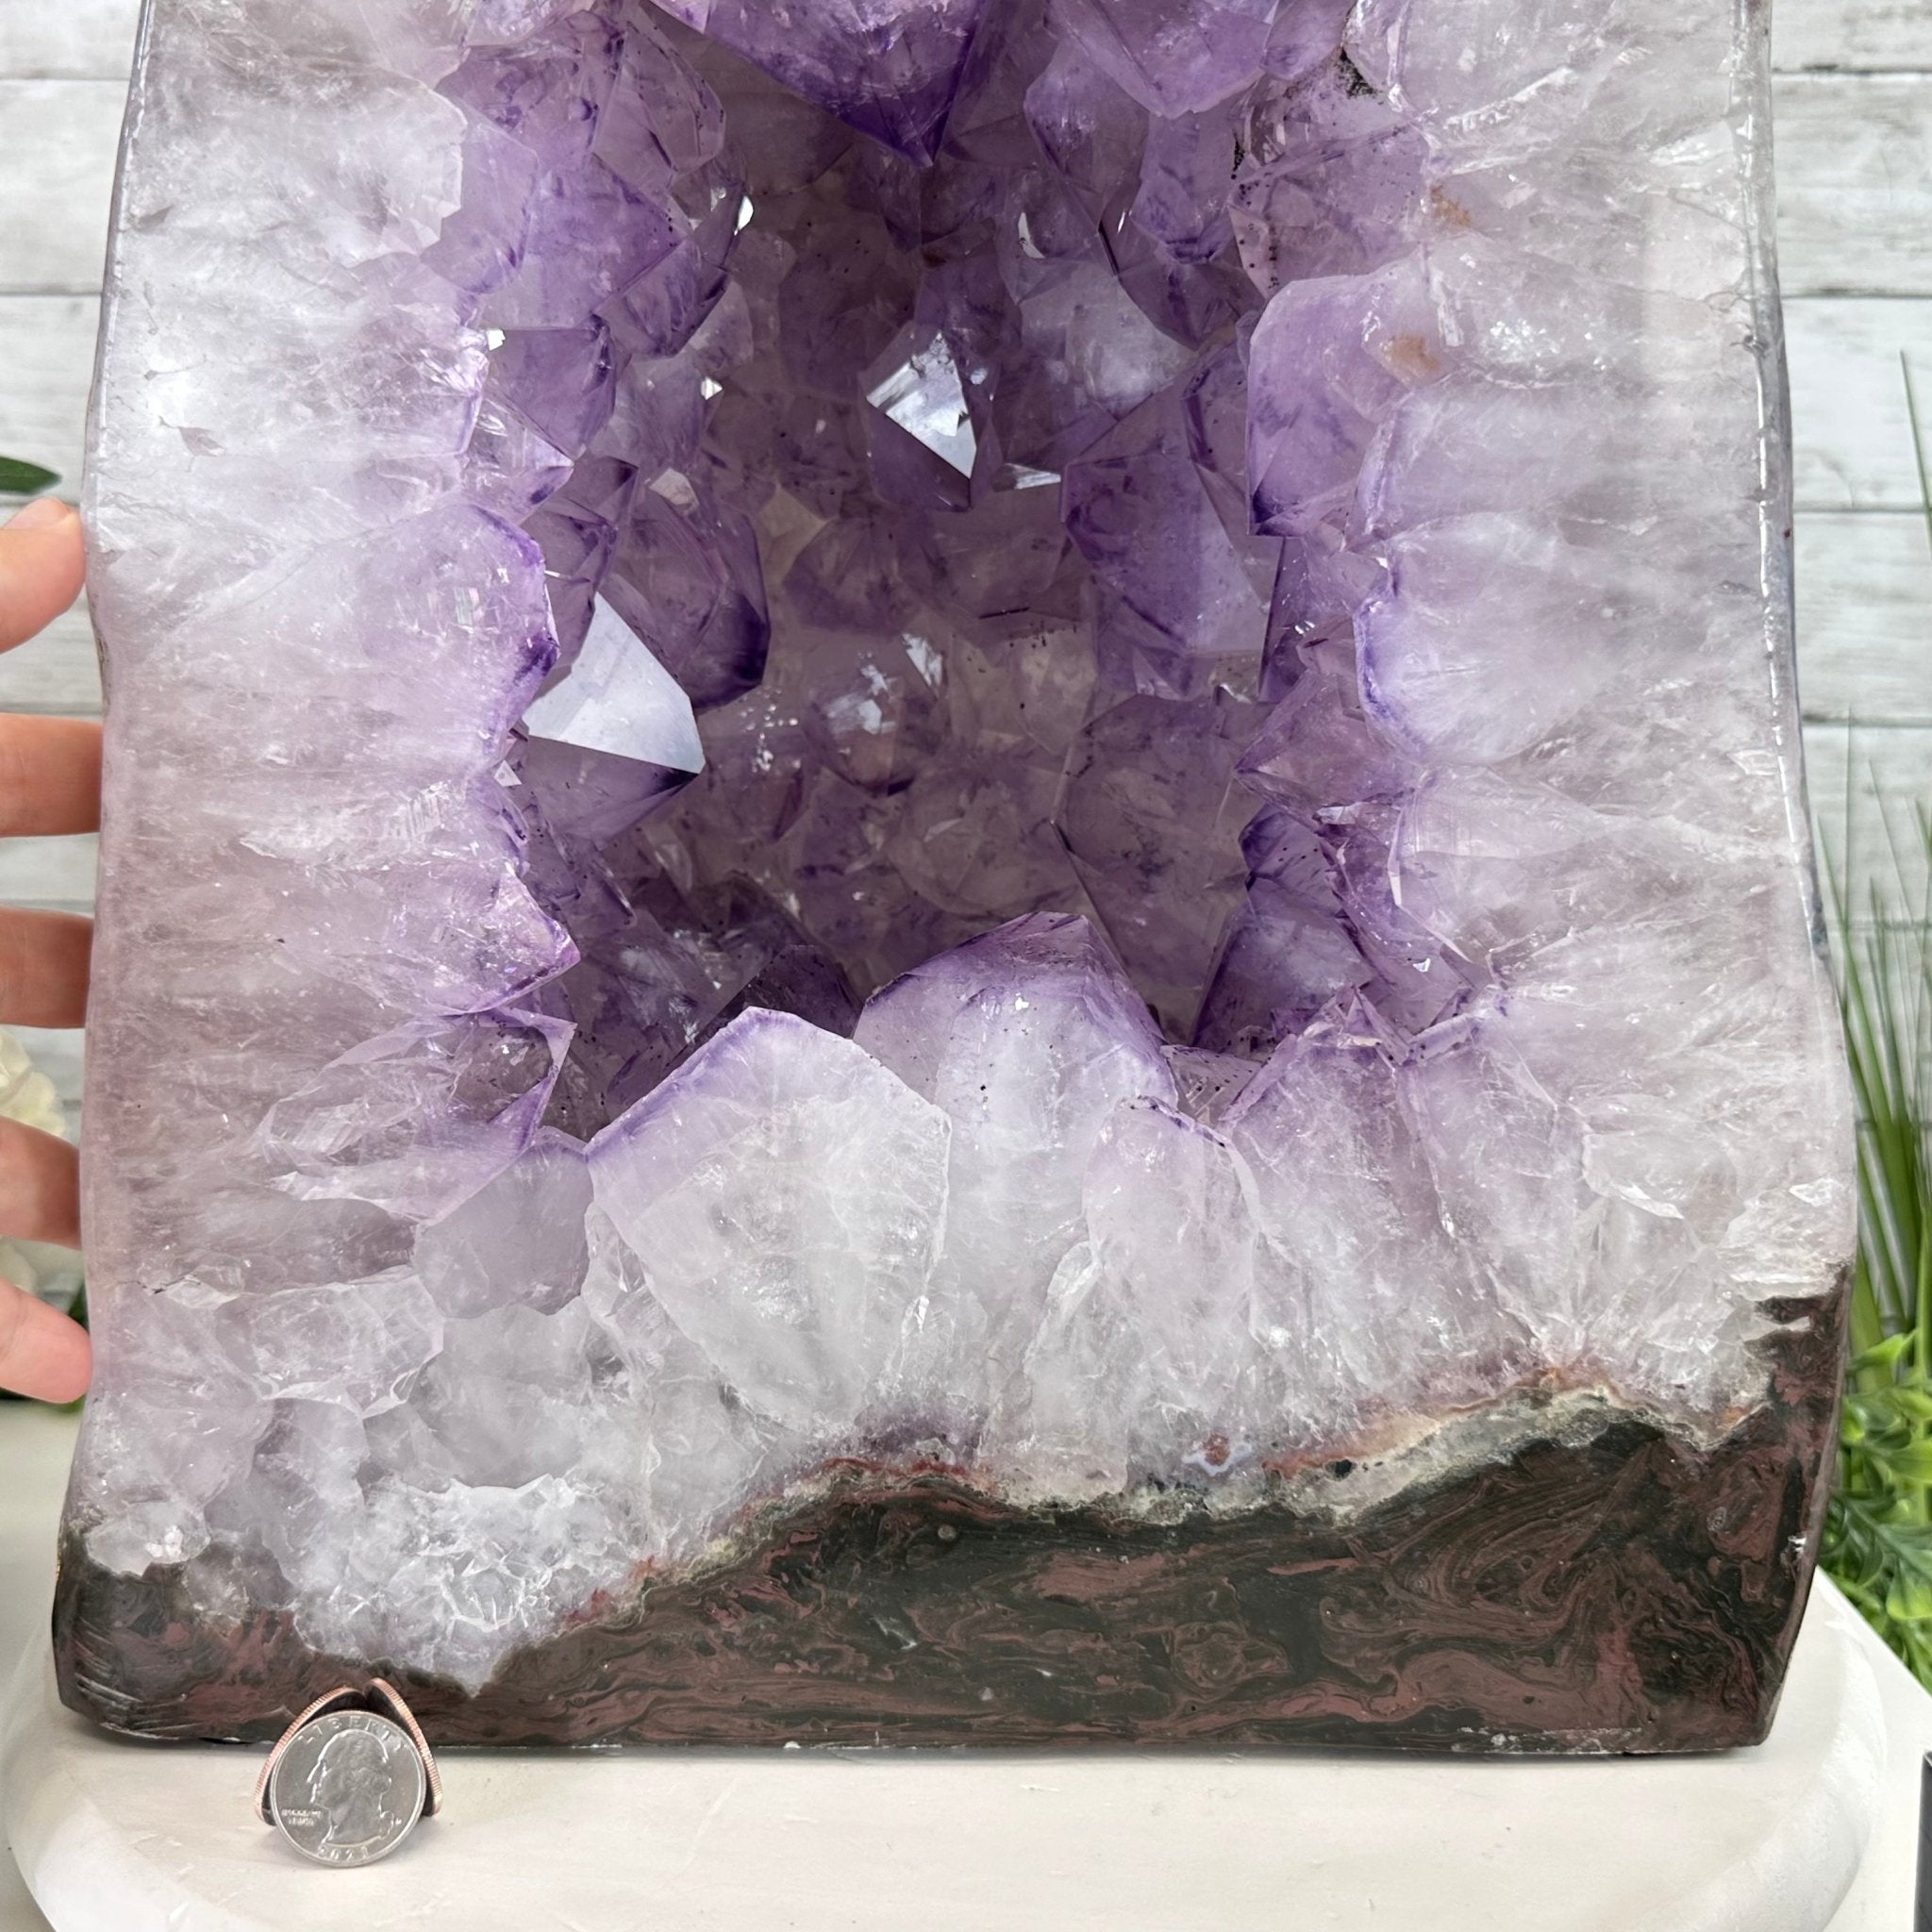 Extra Quality Polished Brazilian Amethyst Cathedral, 87.3 lbs & 17.75" tall Model #5602-0009 by Brazil Gems - Brazil GemsBrazil GemsExtra Quality Polished Brazilian Amethyst Cathedral, 87.3 lbs & 17.75" tall Model #5602-0009 by Brazil GemsPolished Cathedrals5602-0009